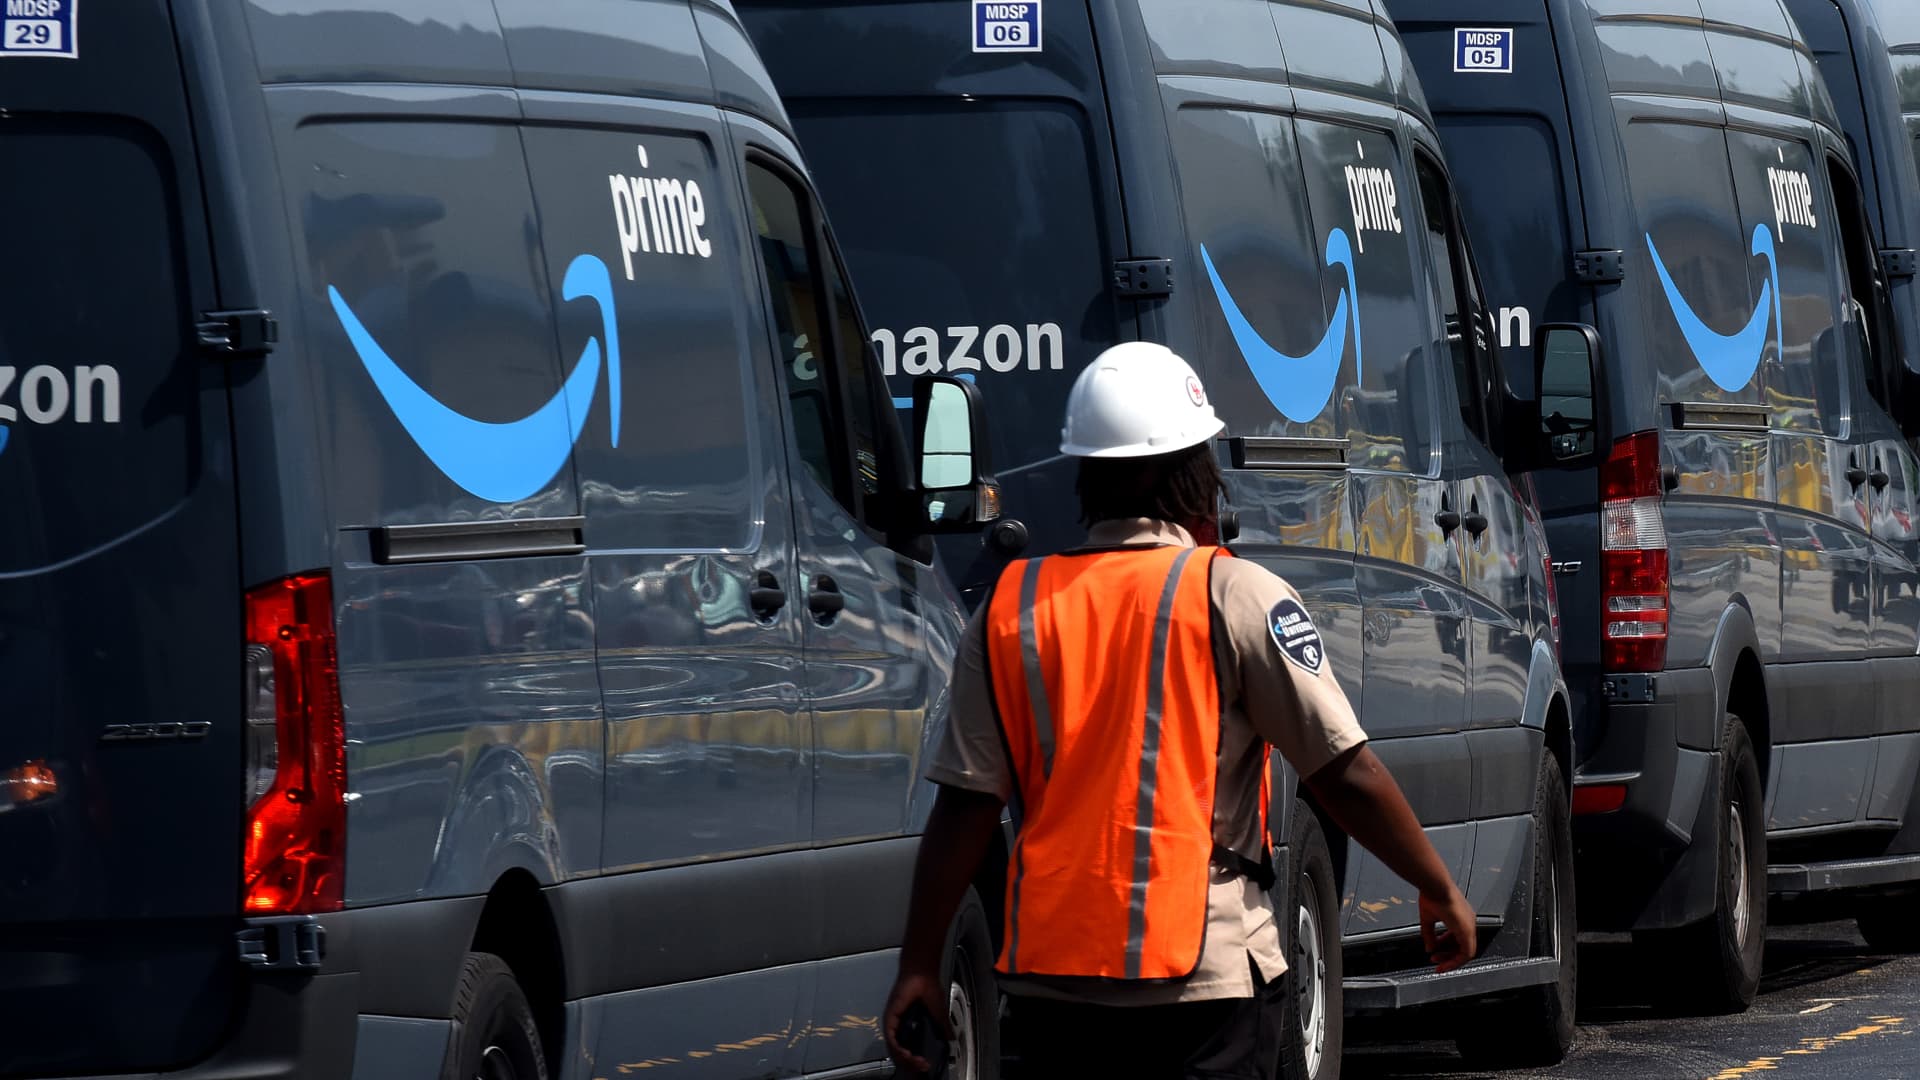 Amazon vans line up at a distribution center to pick up packages for delivery on Amazon Prime Day in Orlando, Florida.